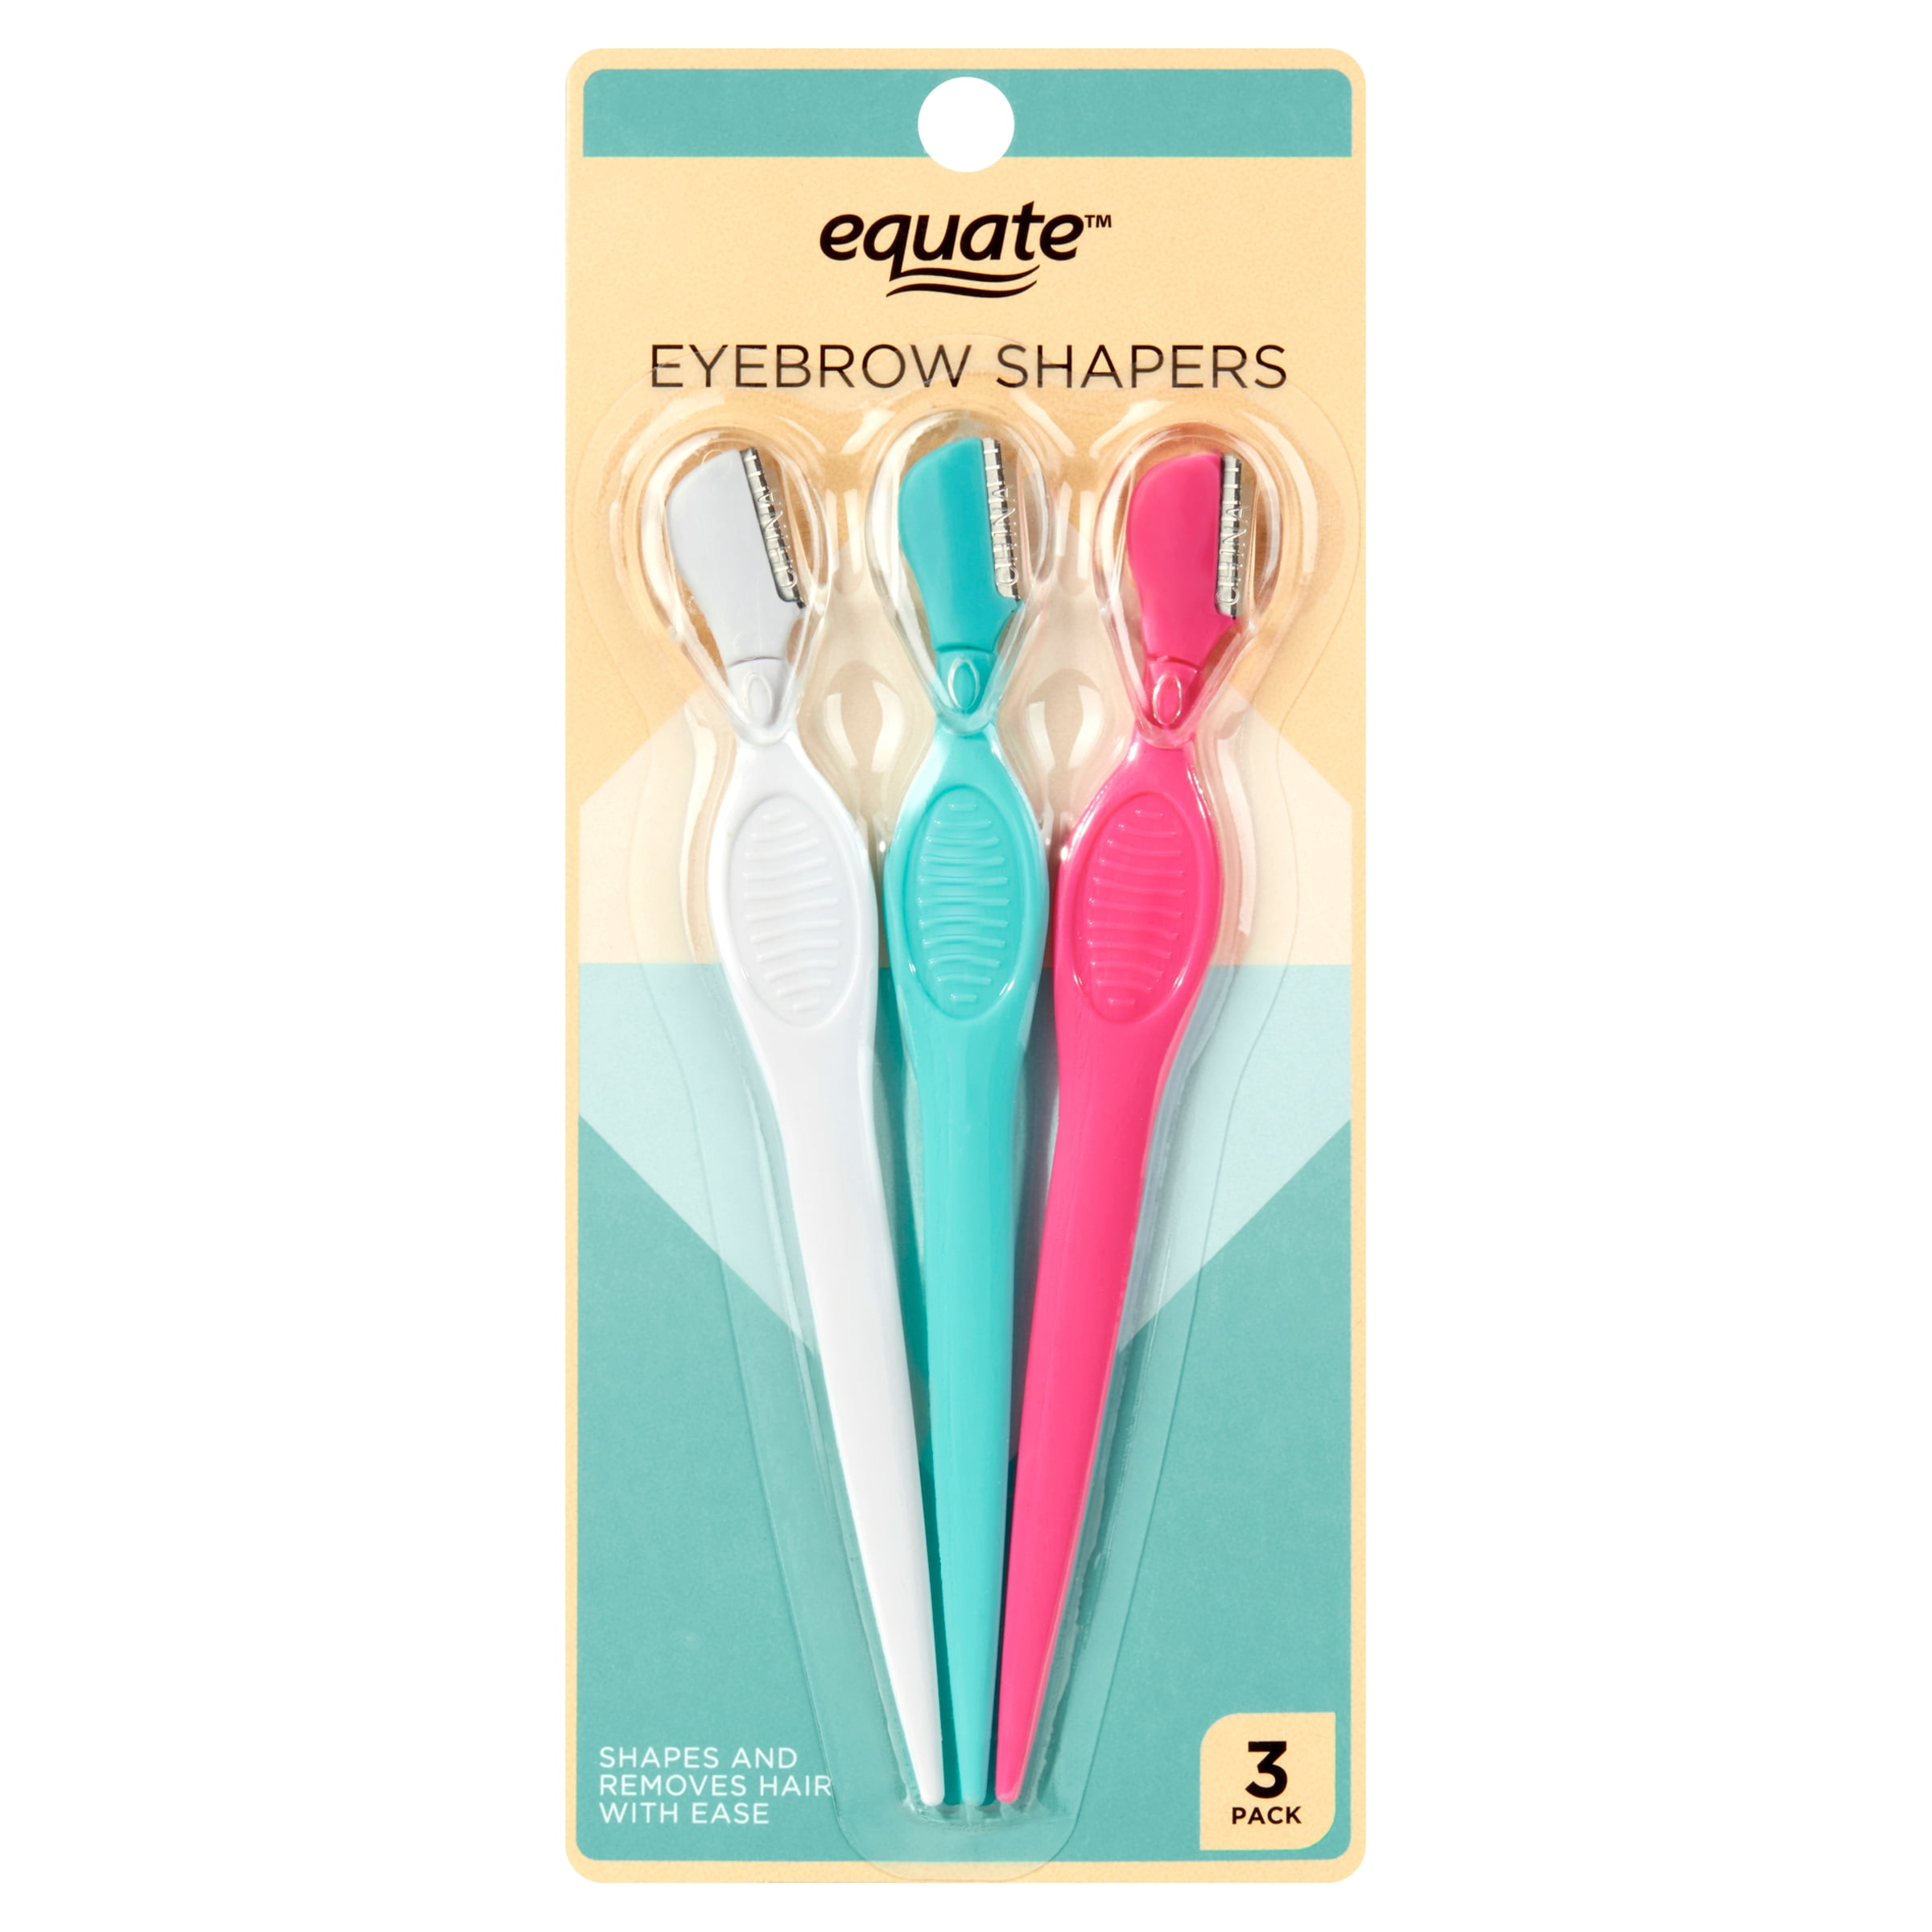 Equate Eyebrow Shapers, 3 count